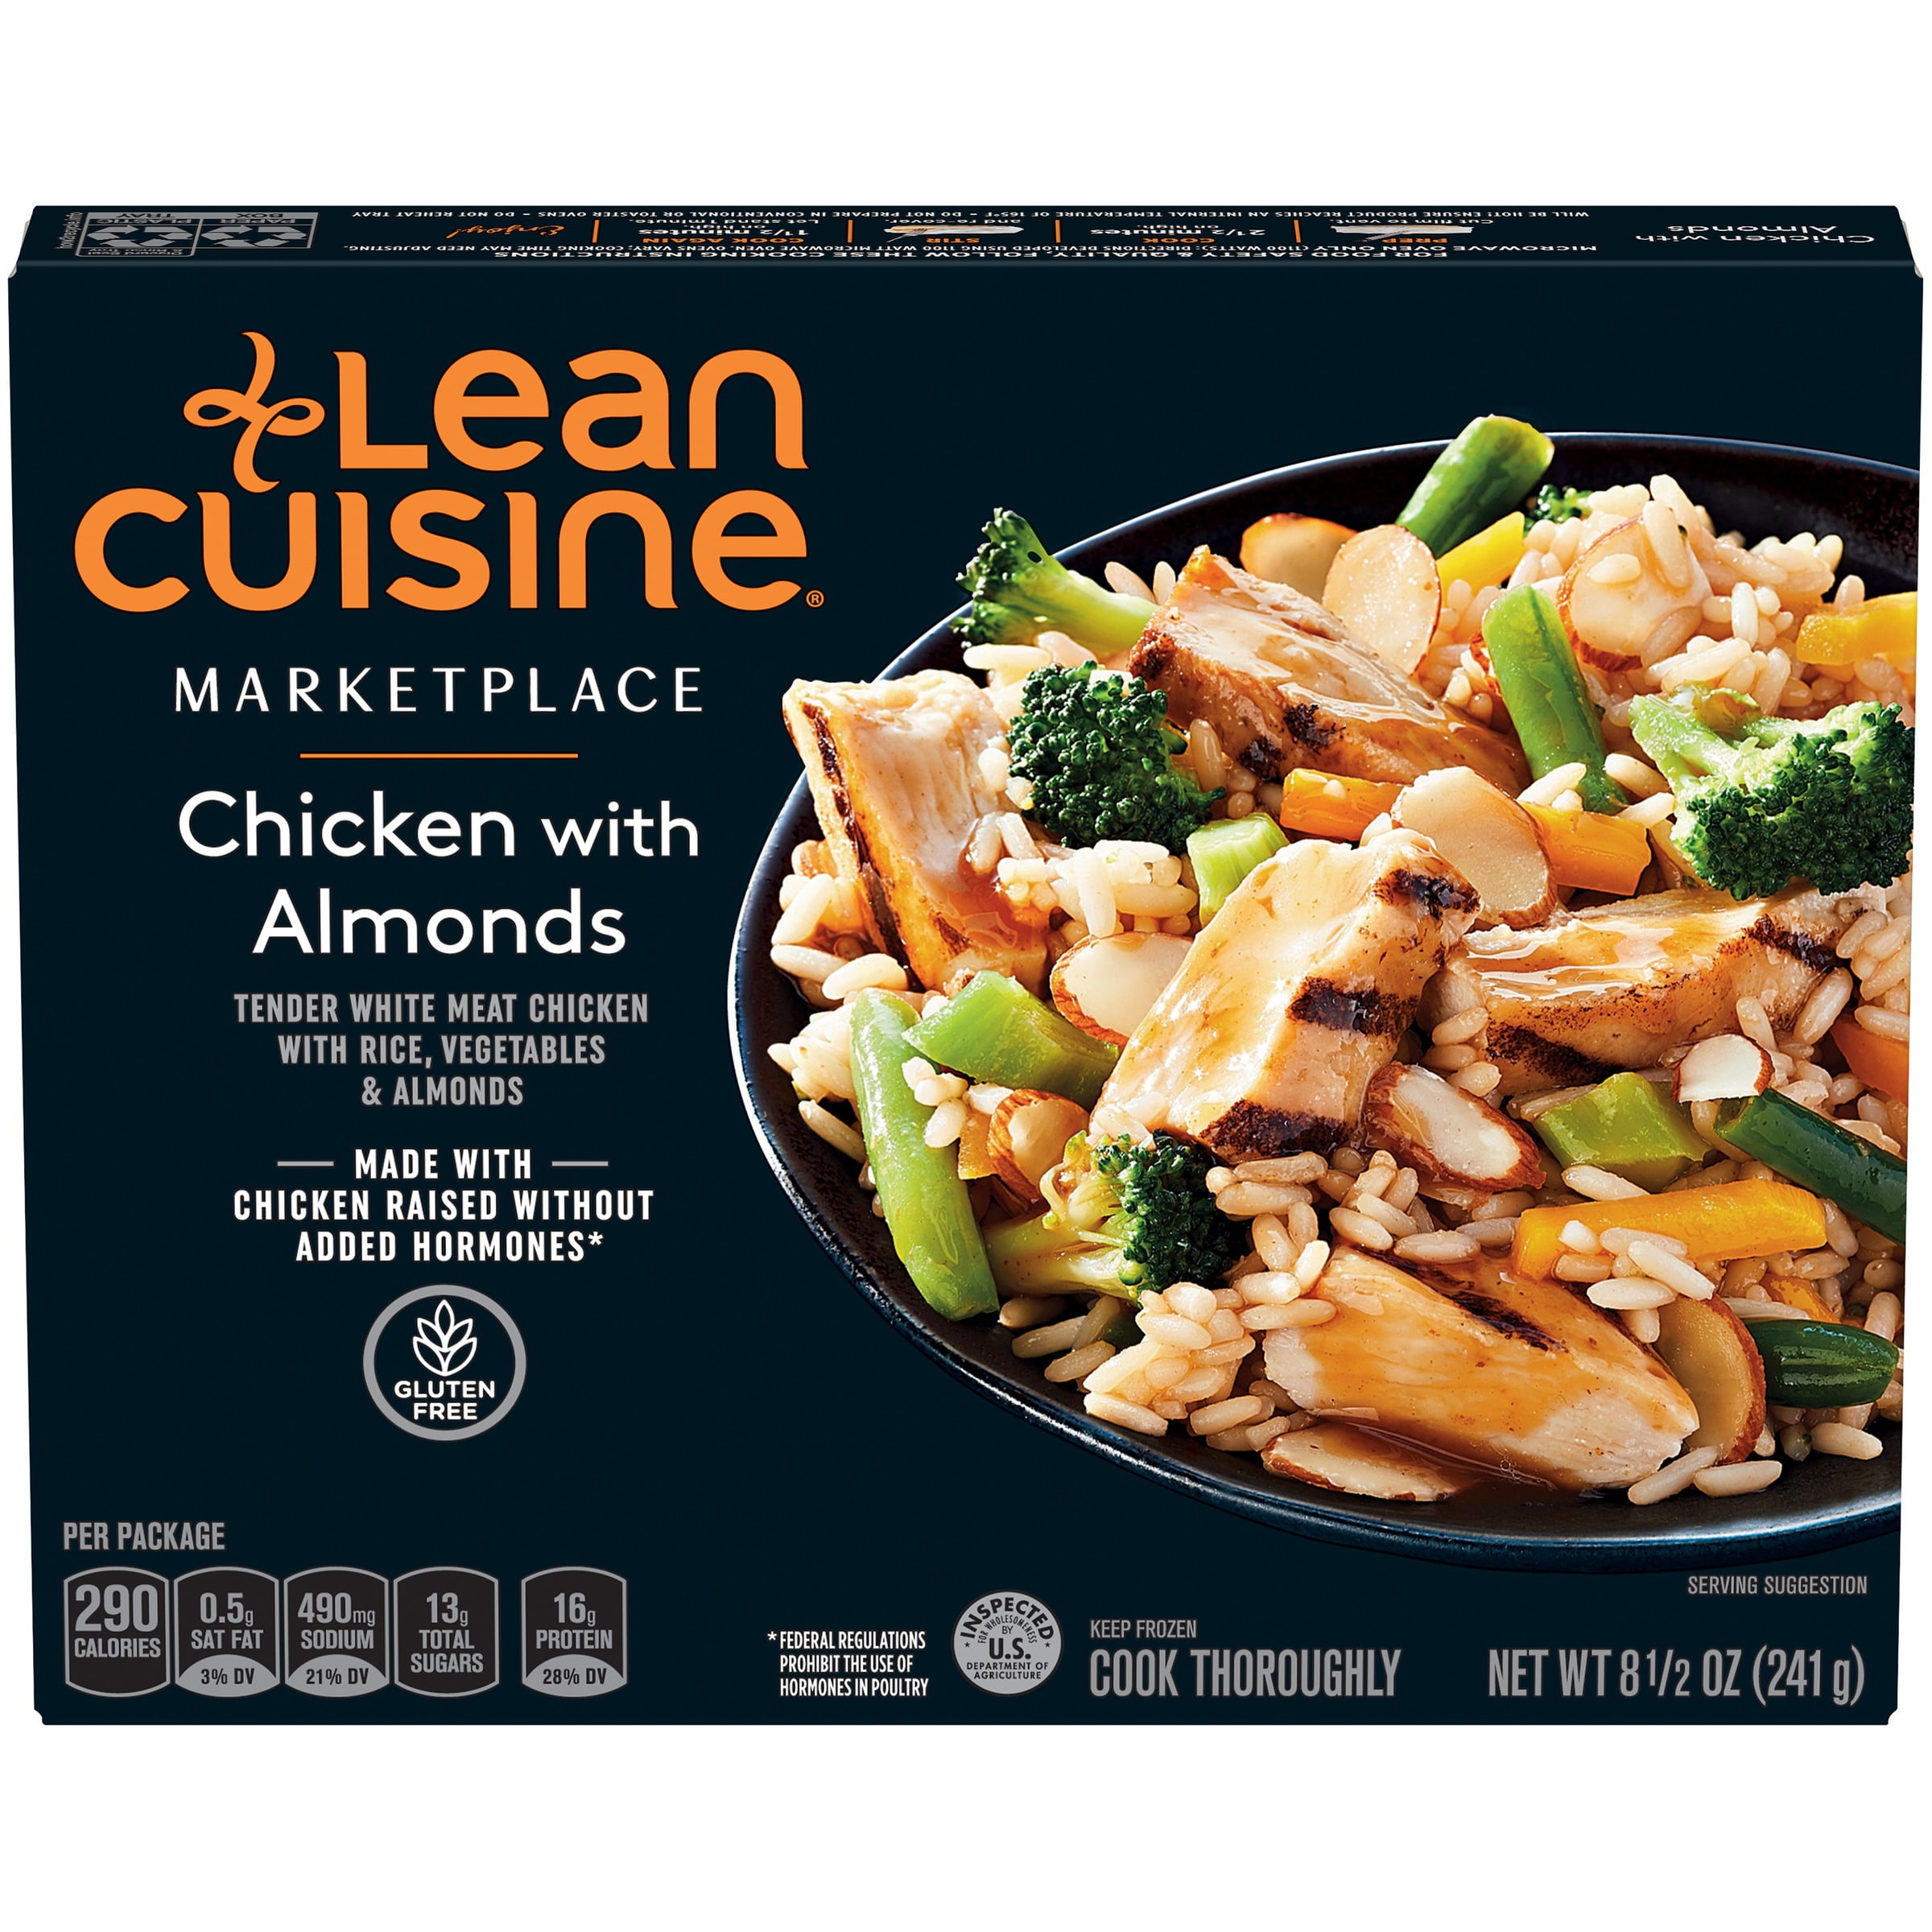 LEAN CUISINE MARKETPLACE Chicken with Almonds 8.5 oz. Box ...